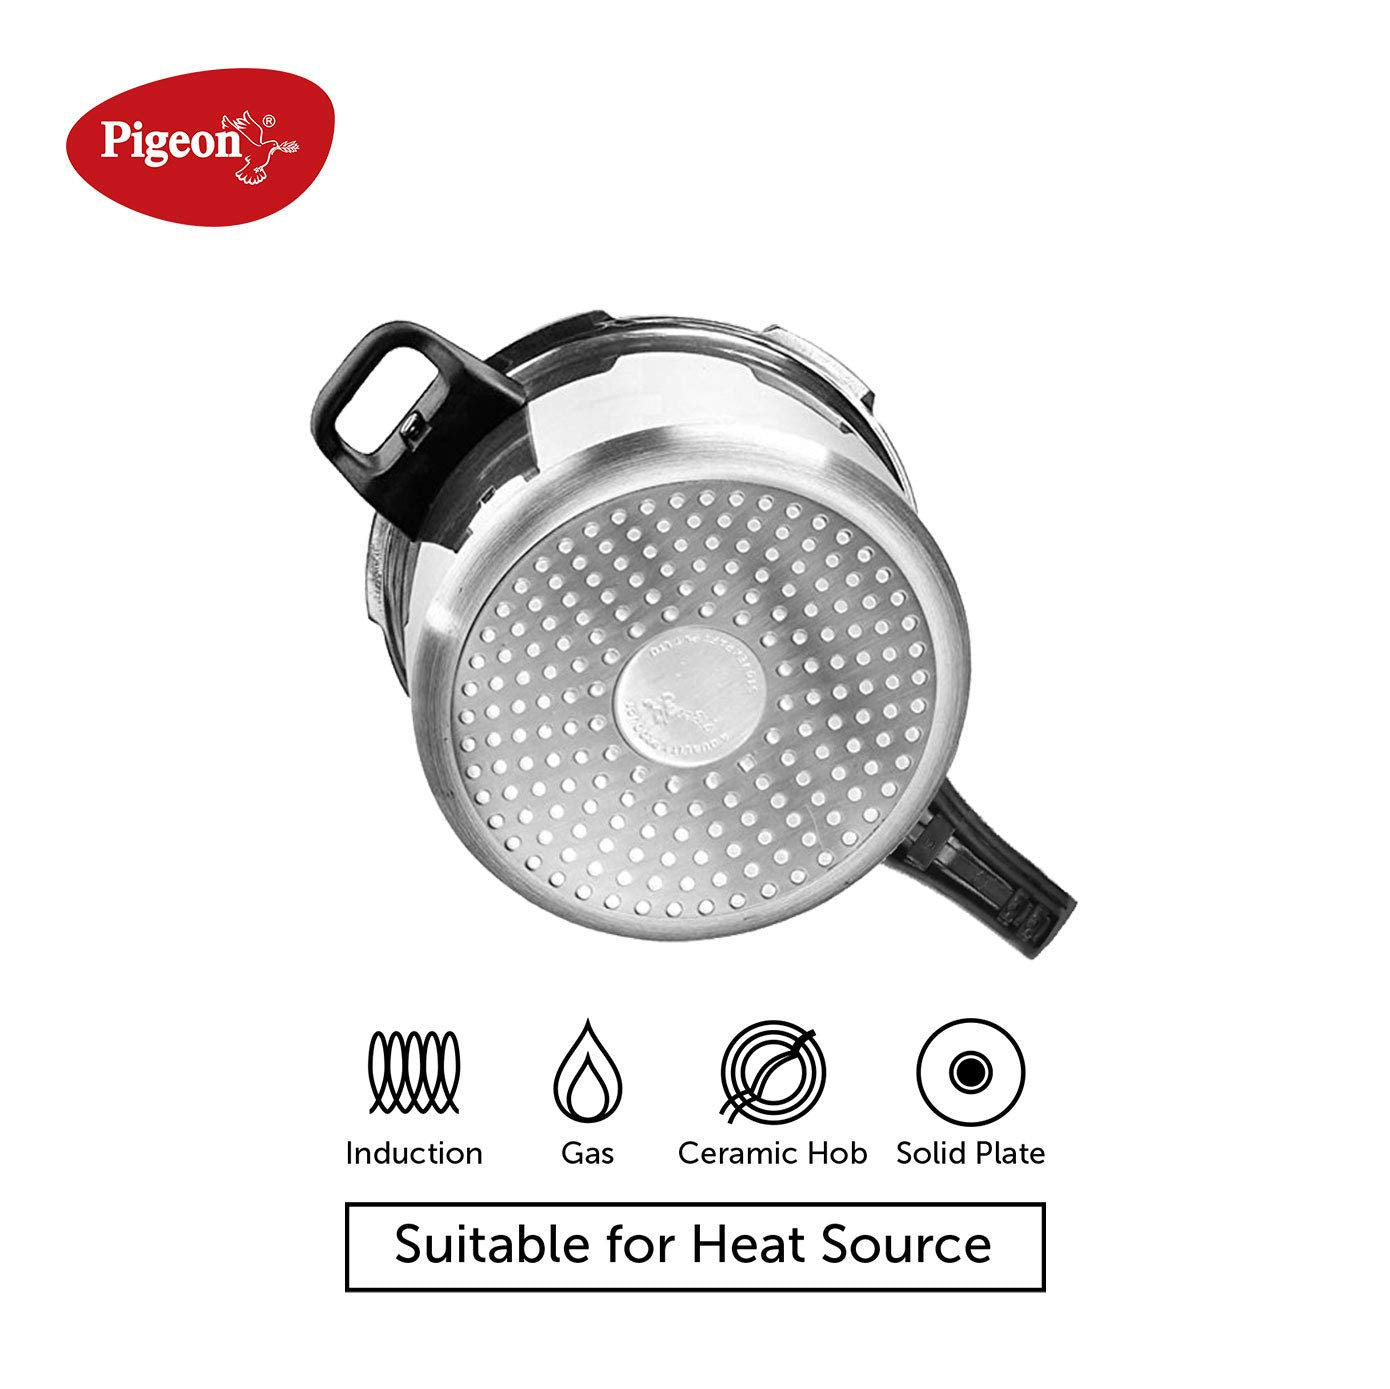 Pigeon Inox Stainless Steel Outer Lid Pressure Cooker 5 Litres, Induction Base - 14046